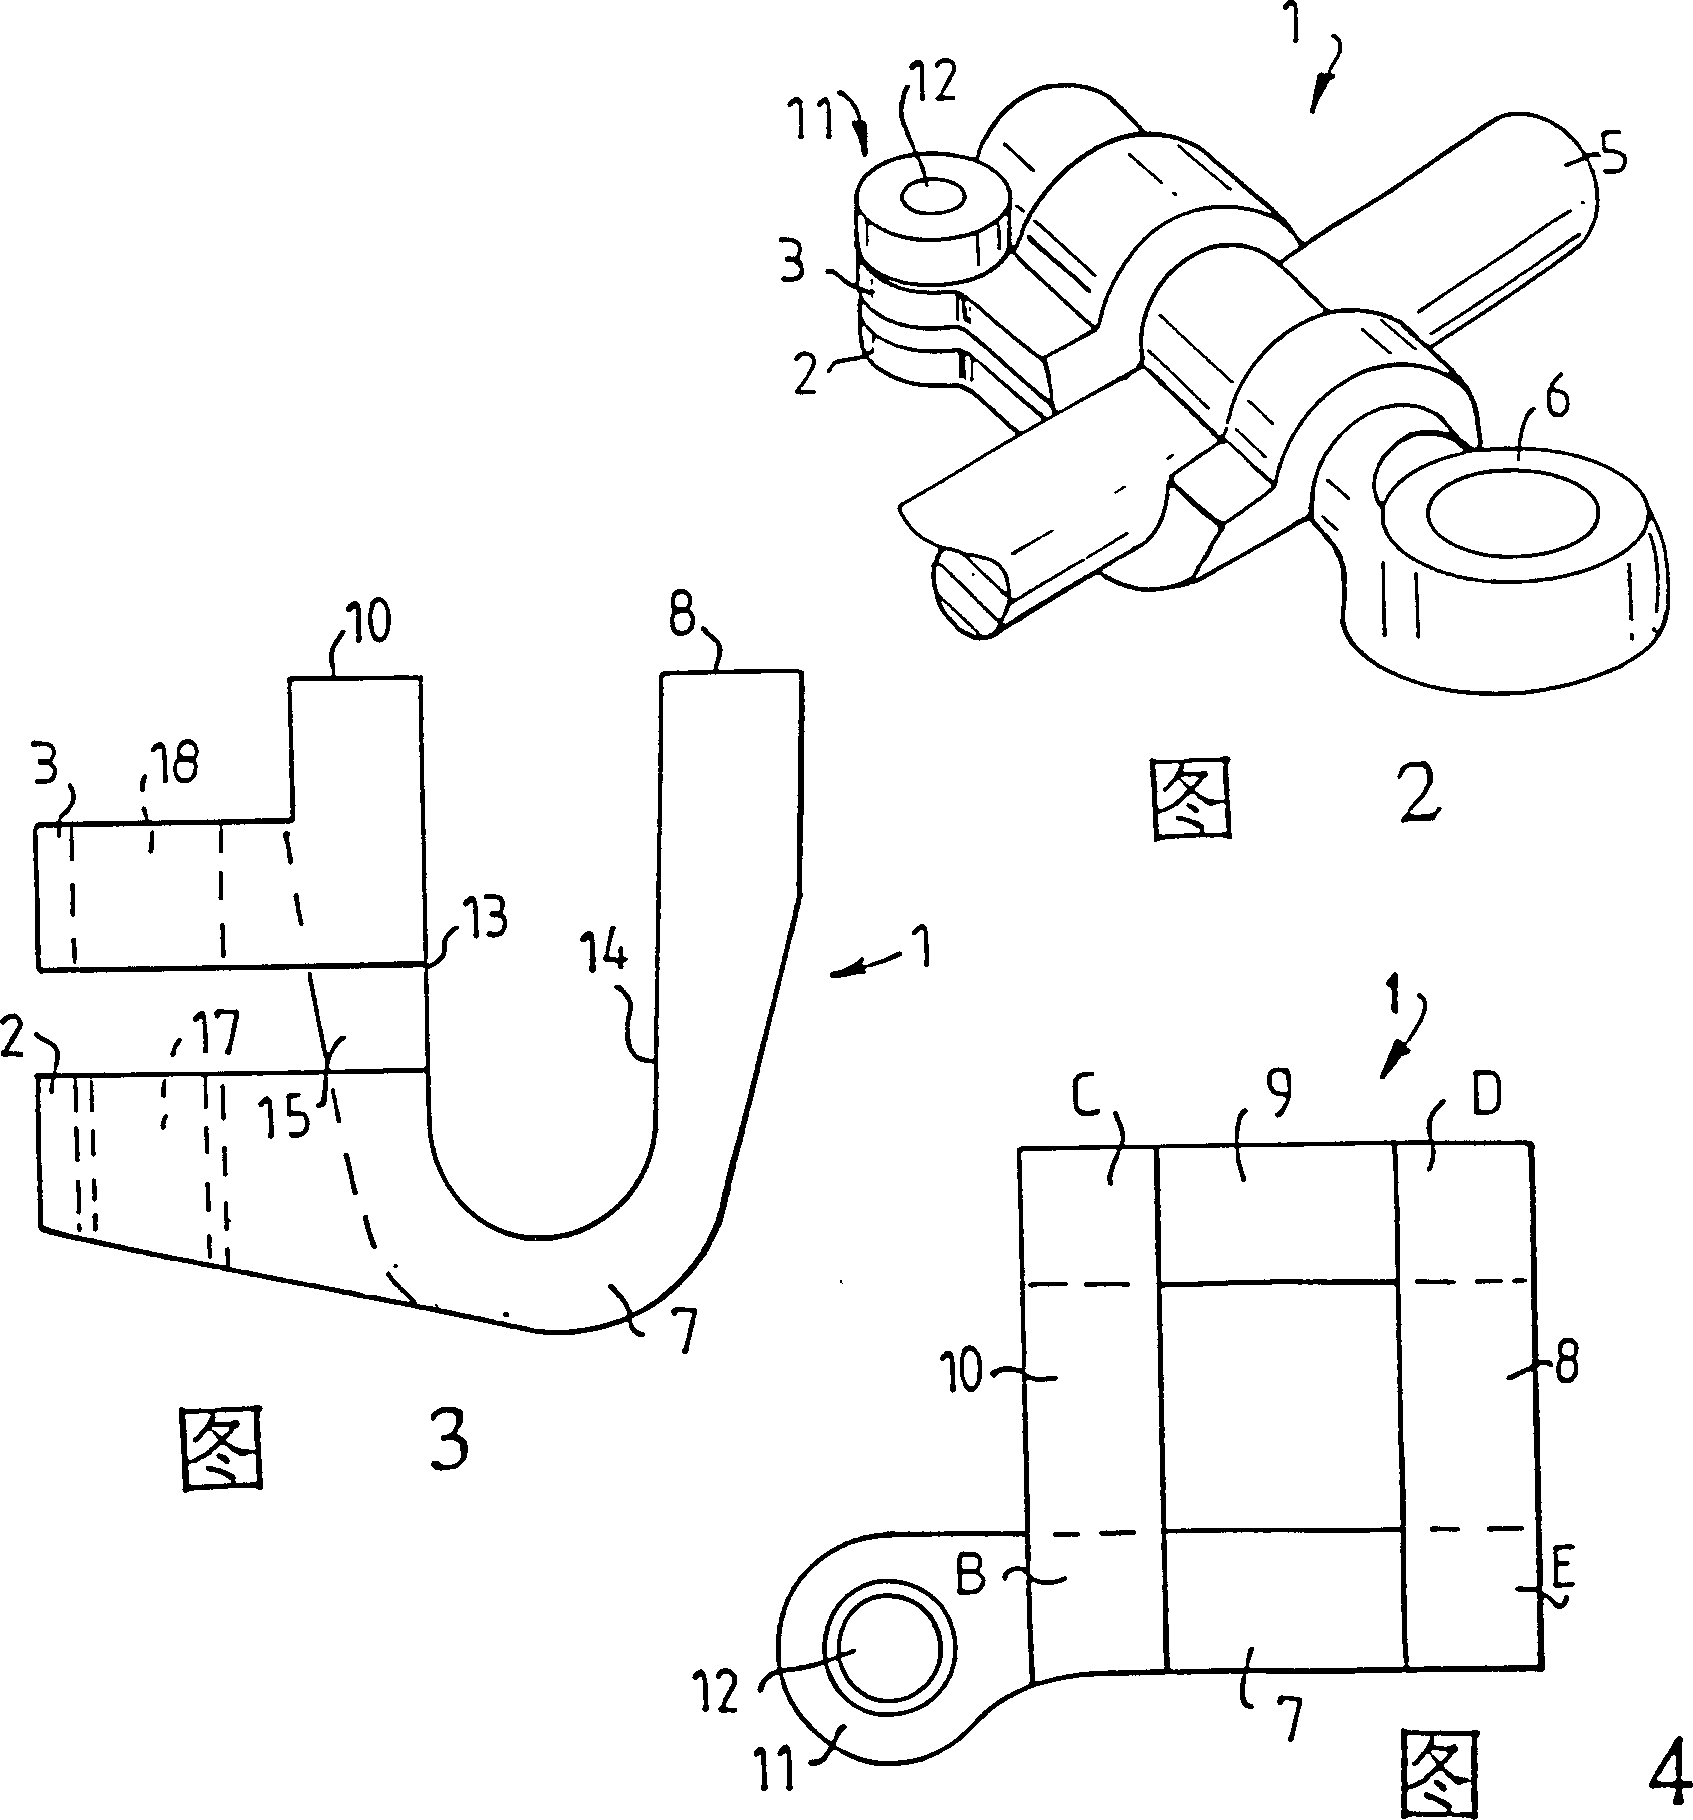 Device for fixating and adjusting the positions of vertebrae in vertebral surgical operations